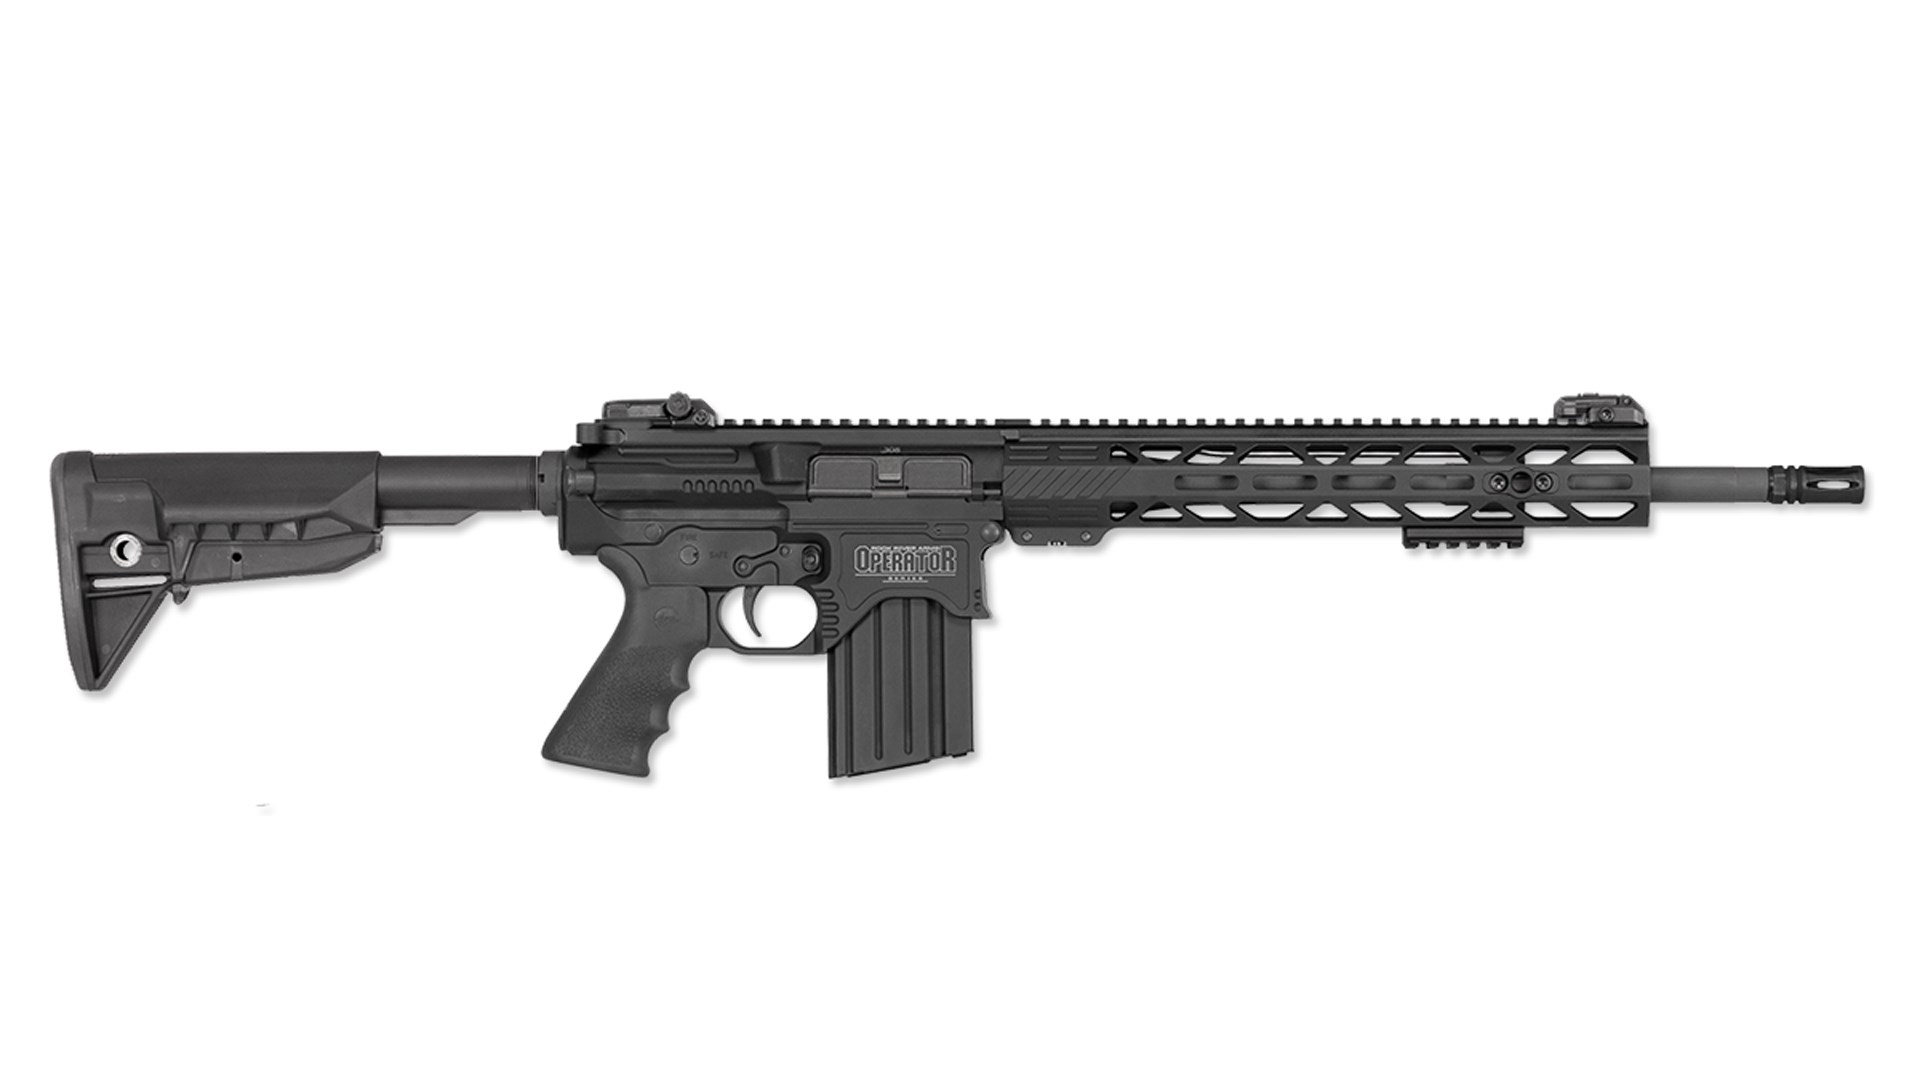 Rock River Arms DMR Operator right side shown on white.